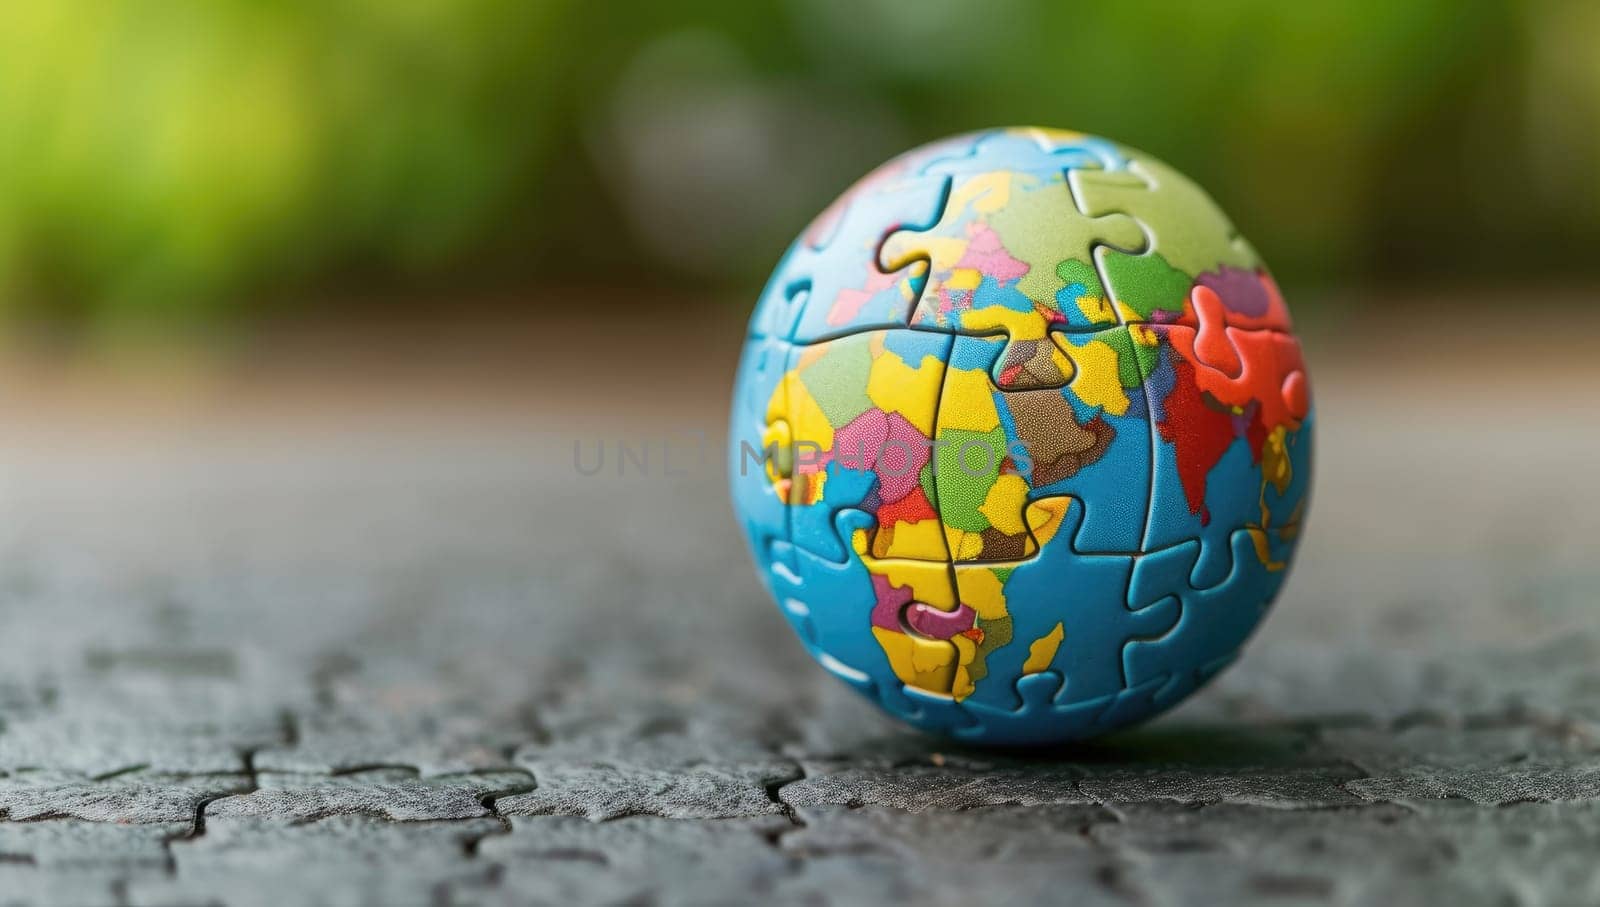 Colorful Puzzle Globe on Cracked Surface